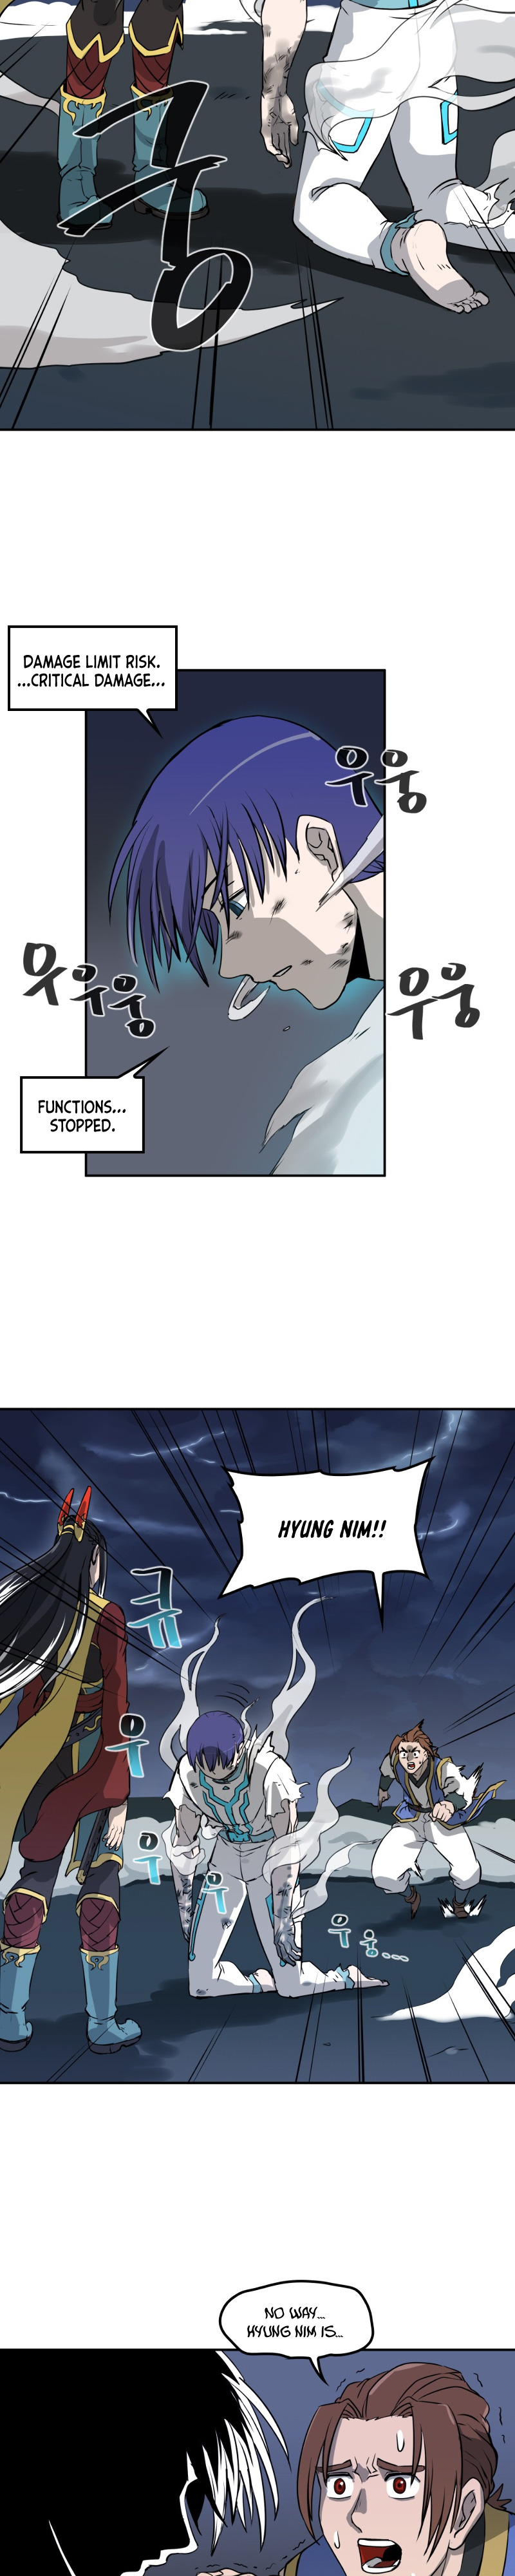 Androids Have No Blood - Page 2